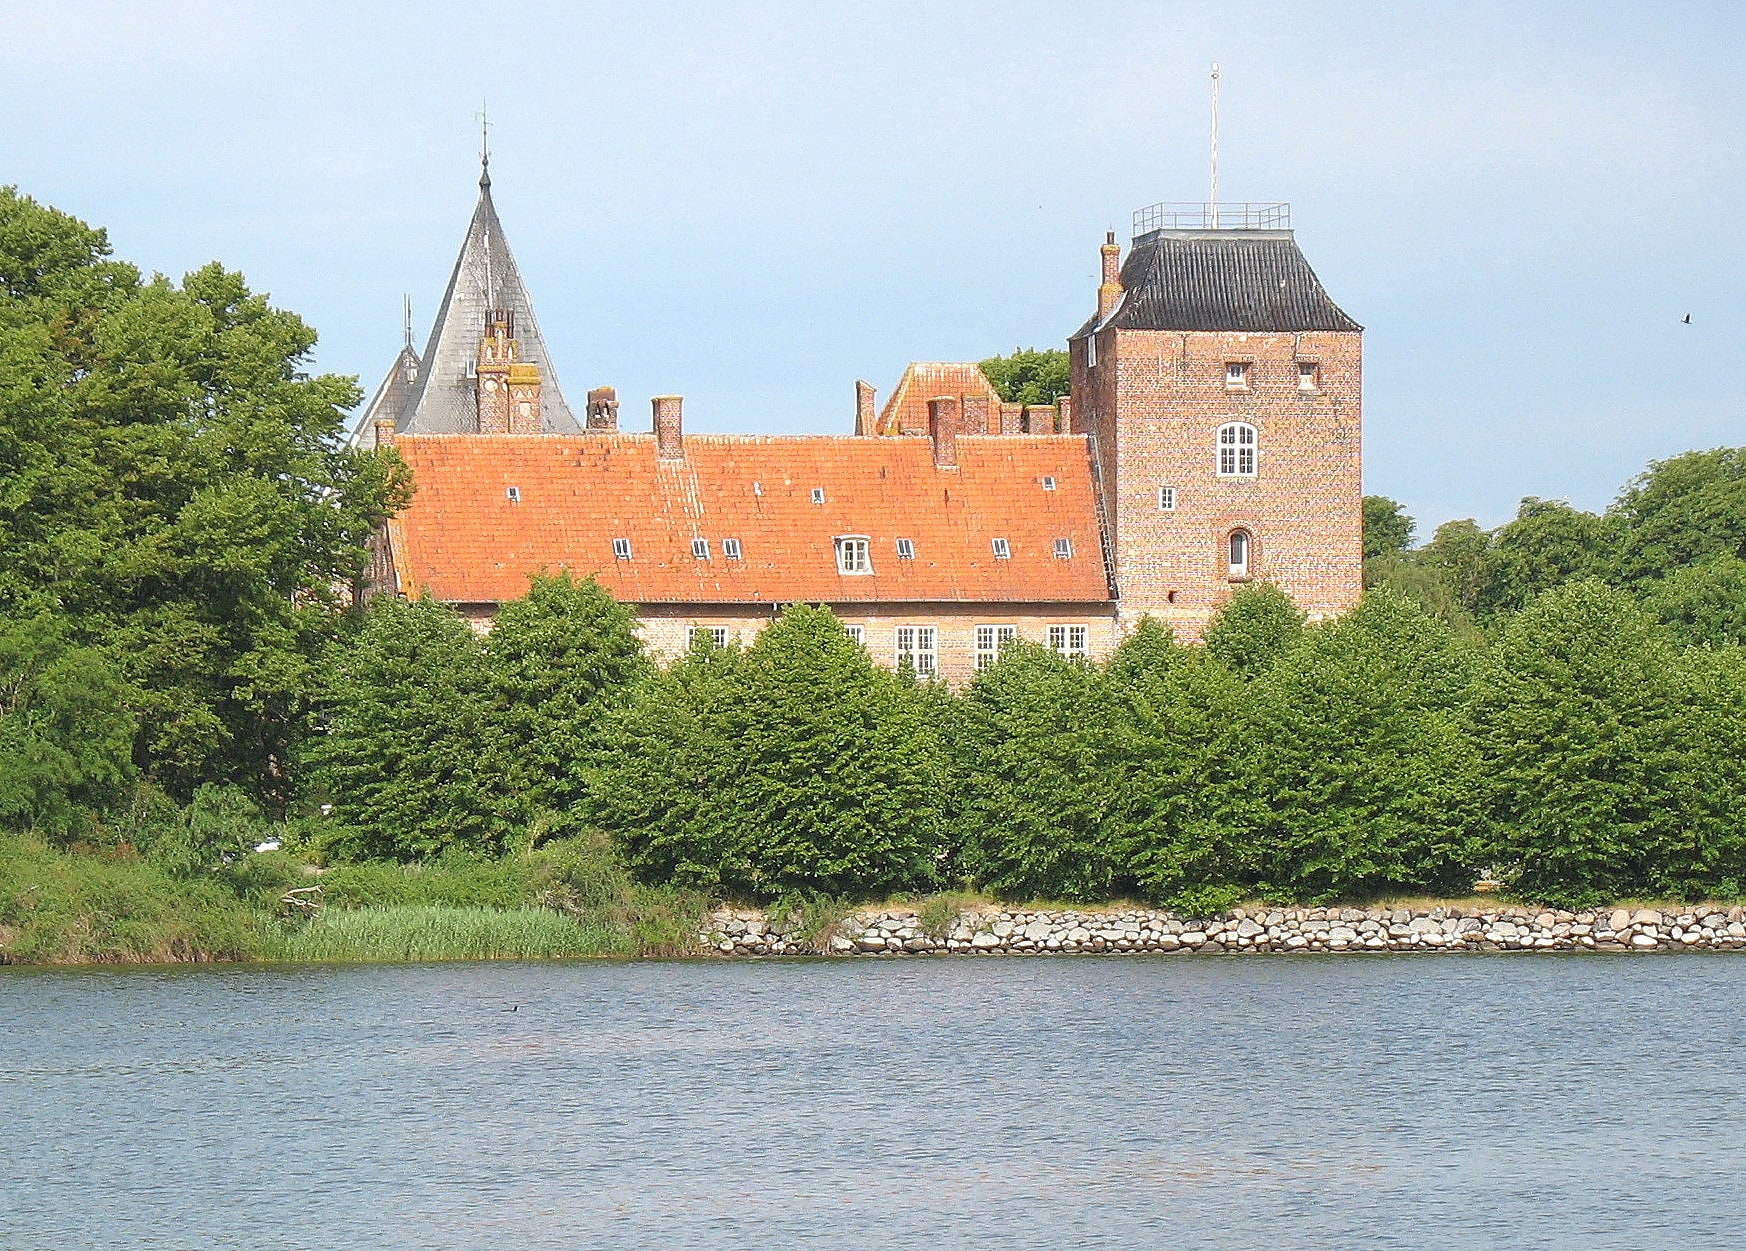 Nysted, Denmark